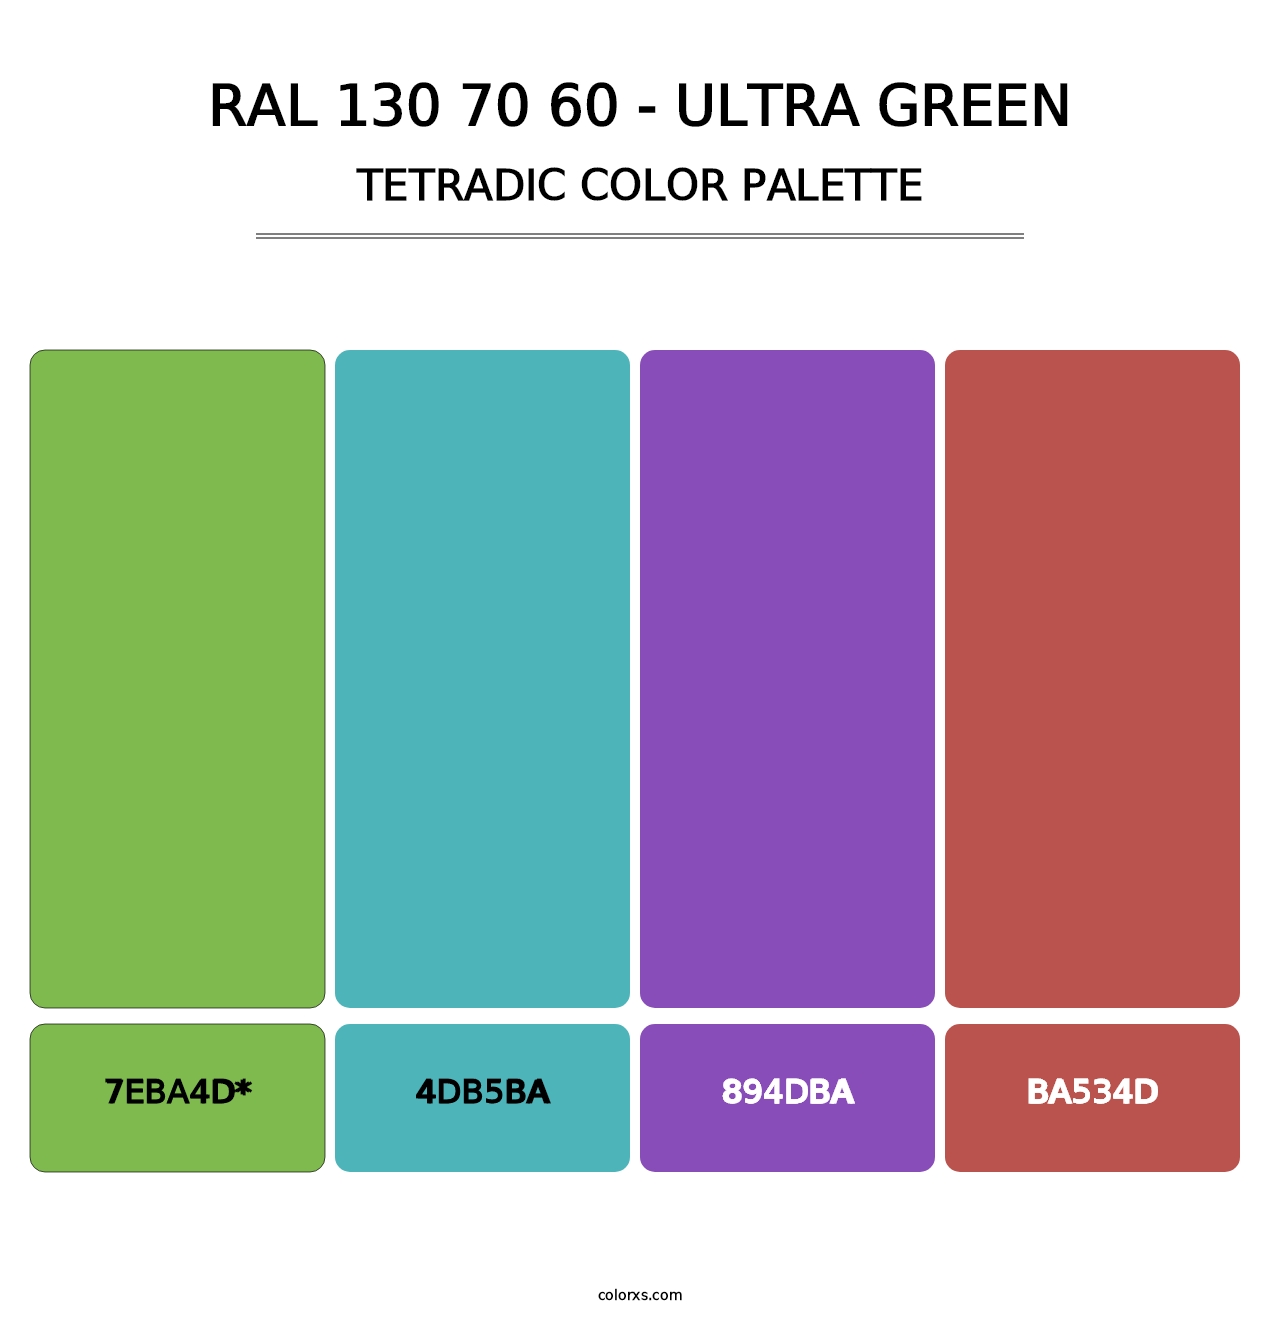 RAL 130 70 60 - Ultra Green - Tetradic Color Palette